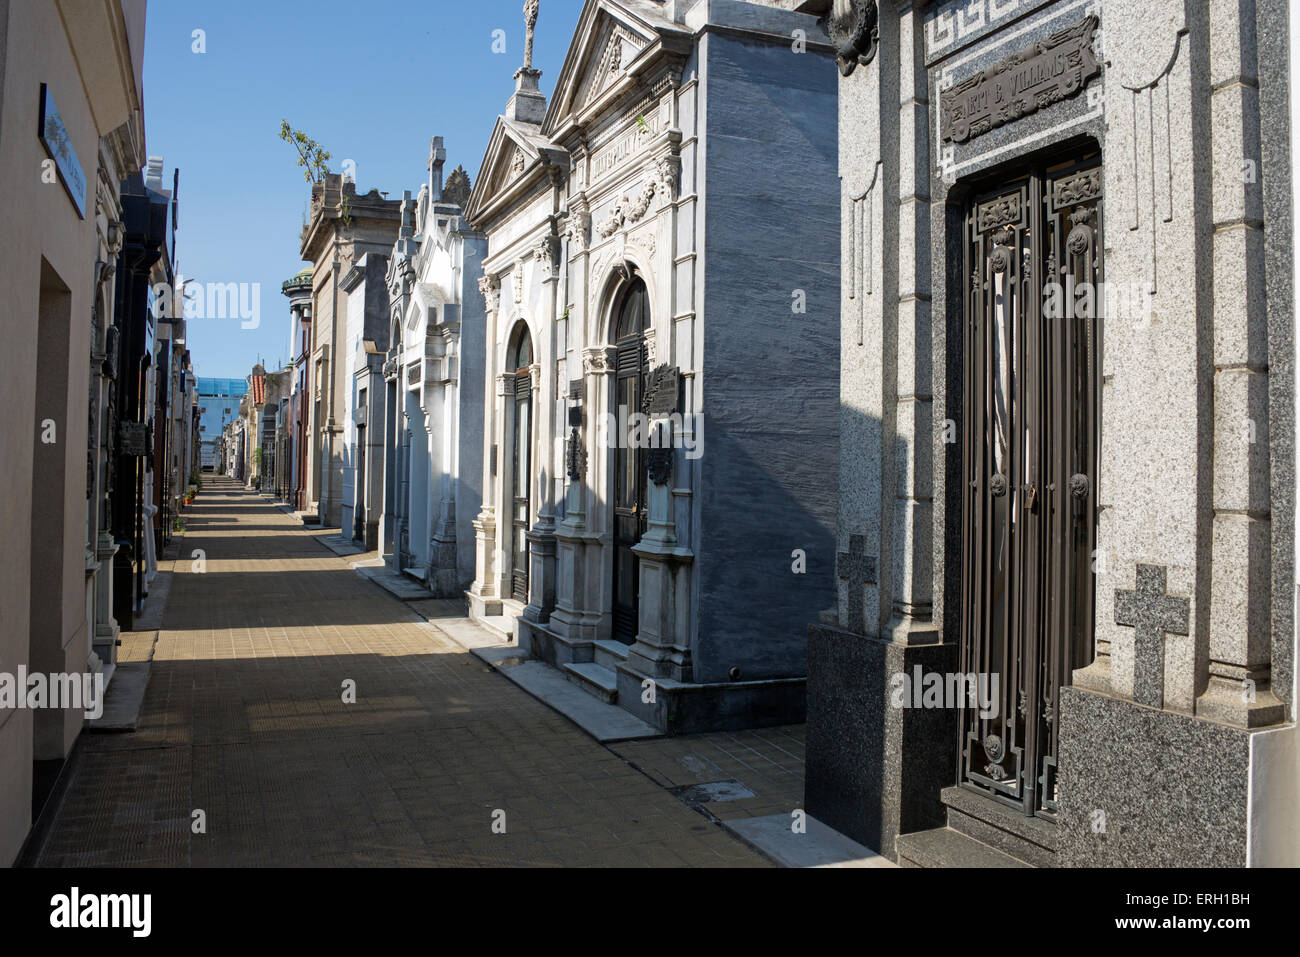 Row of mausoleums Recoleta cemetery Buenos Aires Argentina Stock Photo